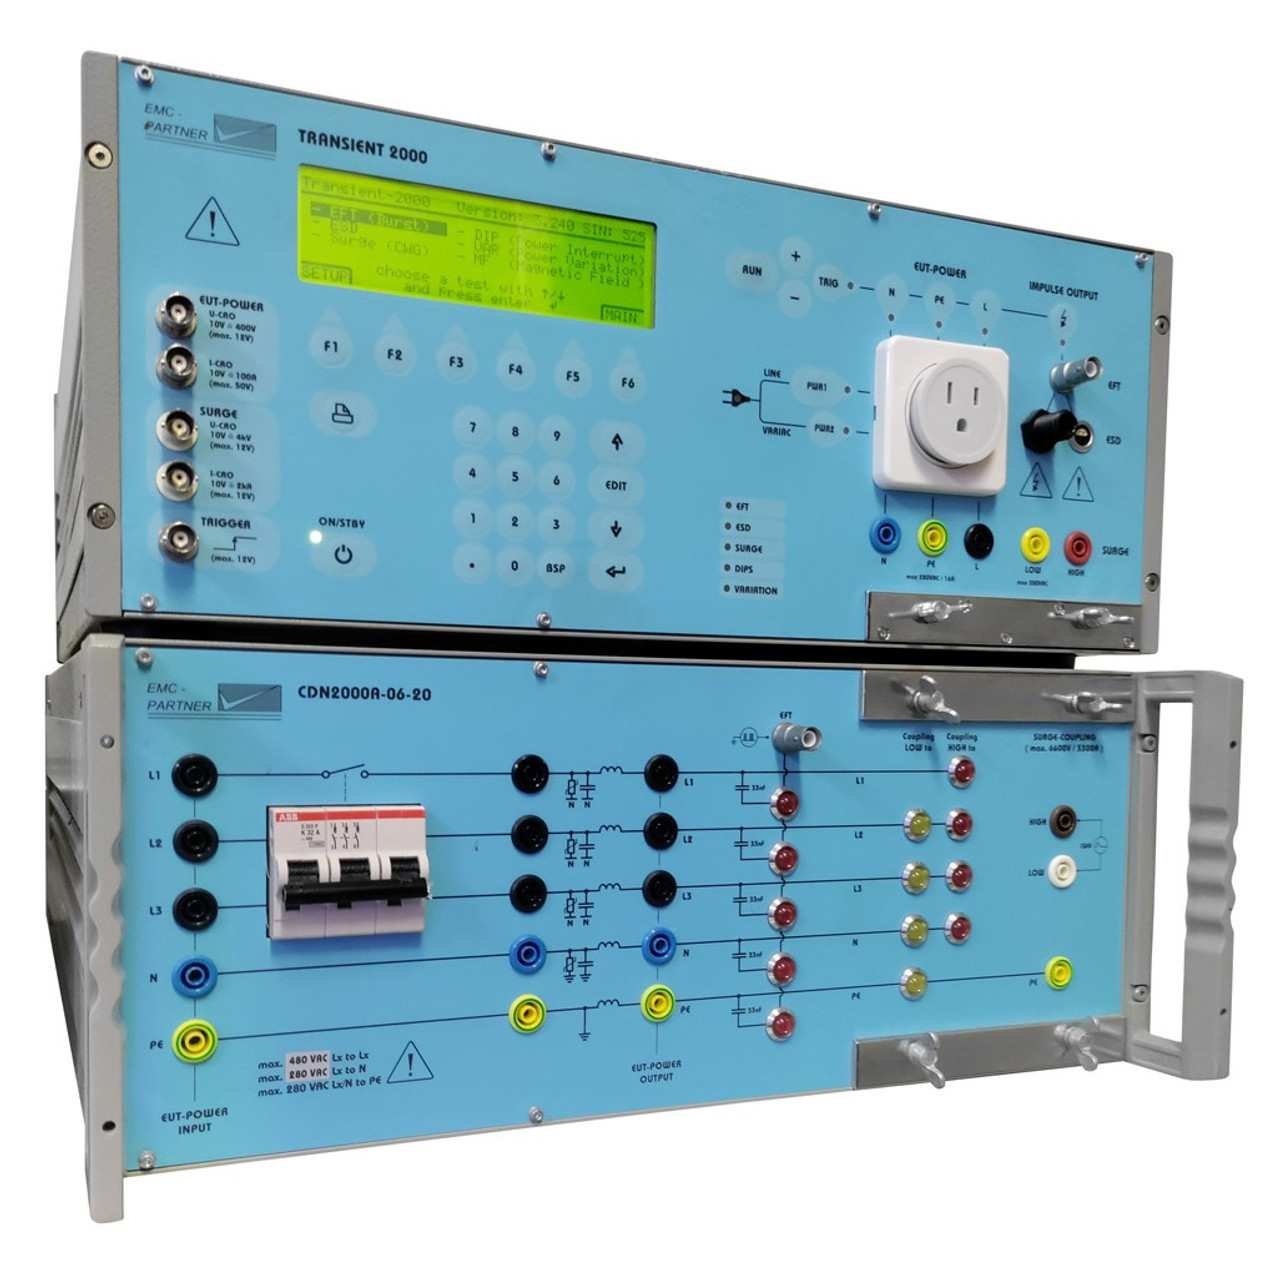 EMC Partner TRA2000 + CDN2000A-06-20 3 Phase Transient Generator with Surge, EFT, and PFQ Testing